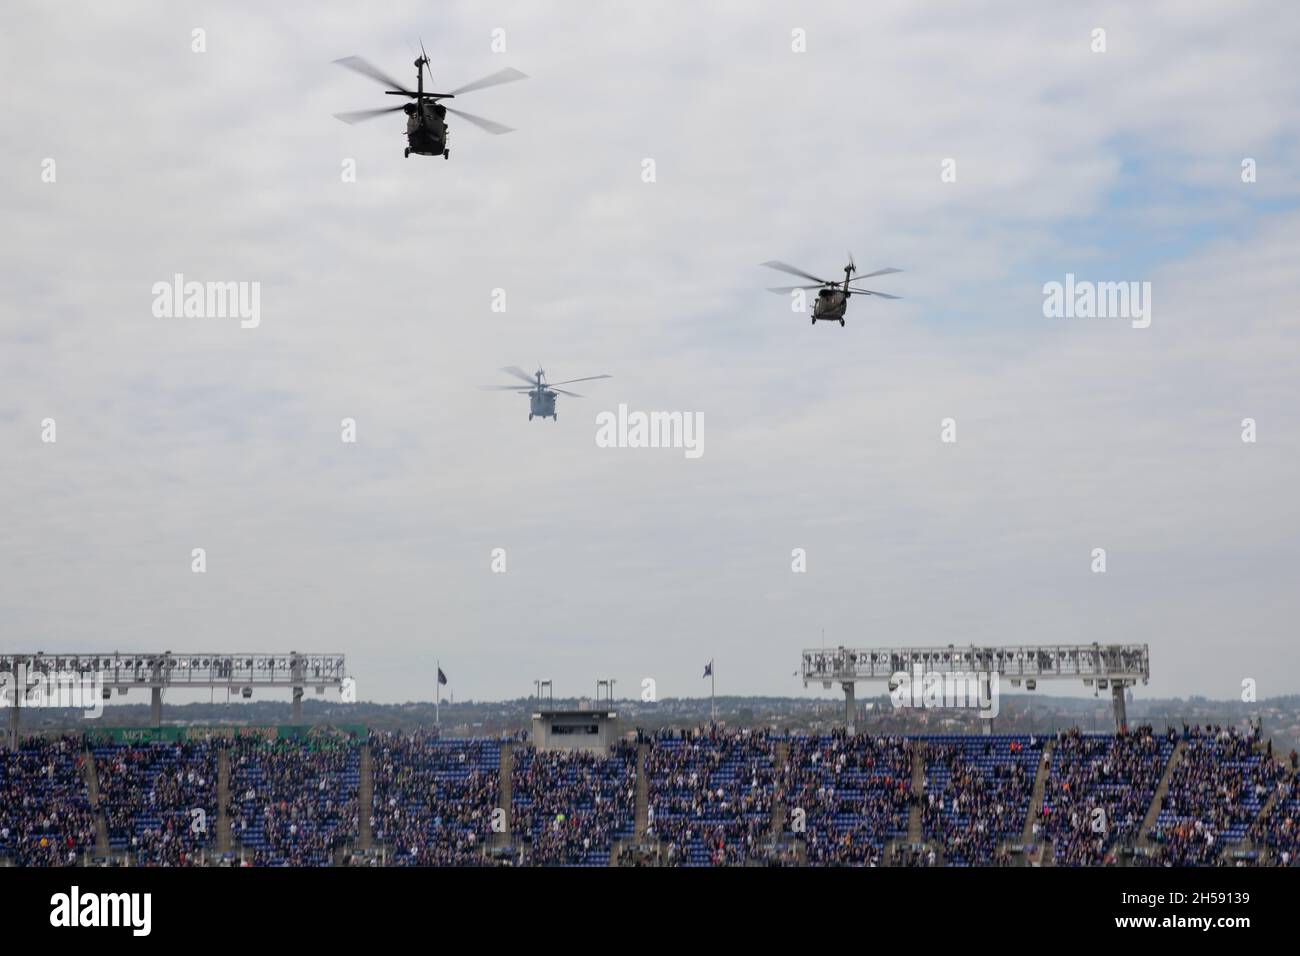 Maryland National Guard soldiers, from C Co., 2nd Assault Helicopter Battalion, 224th Aviation Regiment, Maryland National Guard, conduct a flyover during the national anthem on Oct. 24, 2021, at the M&T Bank Stadium, Baltimore. Four UH-60 Blackhawks flew over the stadium as part of the pre-game ceremonies. (U.S. Army National Guard photo by Staff Sgt. Elizabeth Scott) Stock Photo